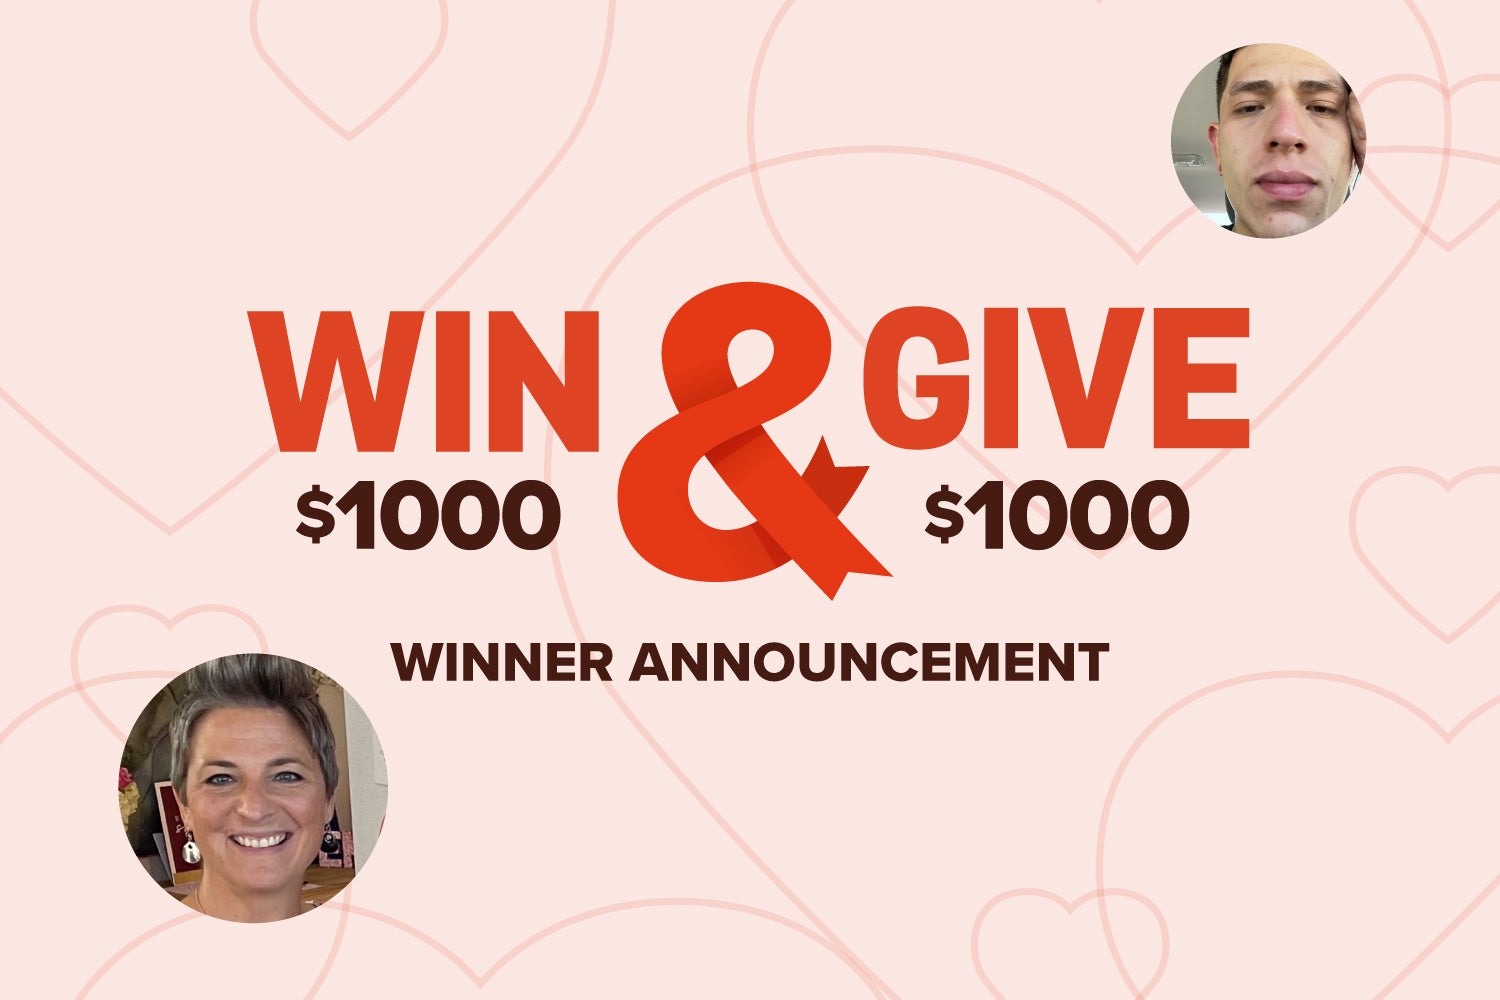 Win & Give for Giving Tuesday winners